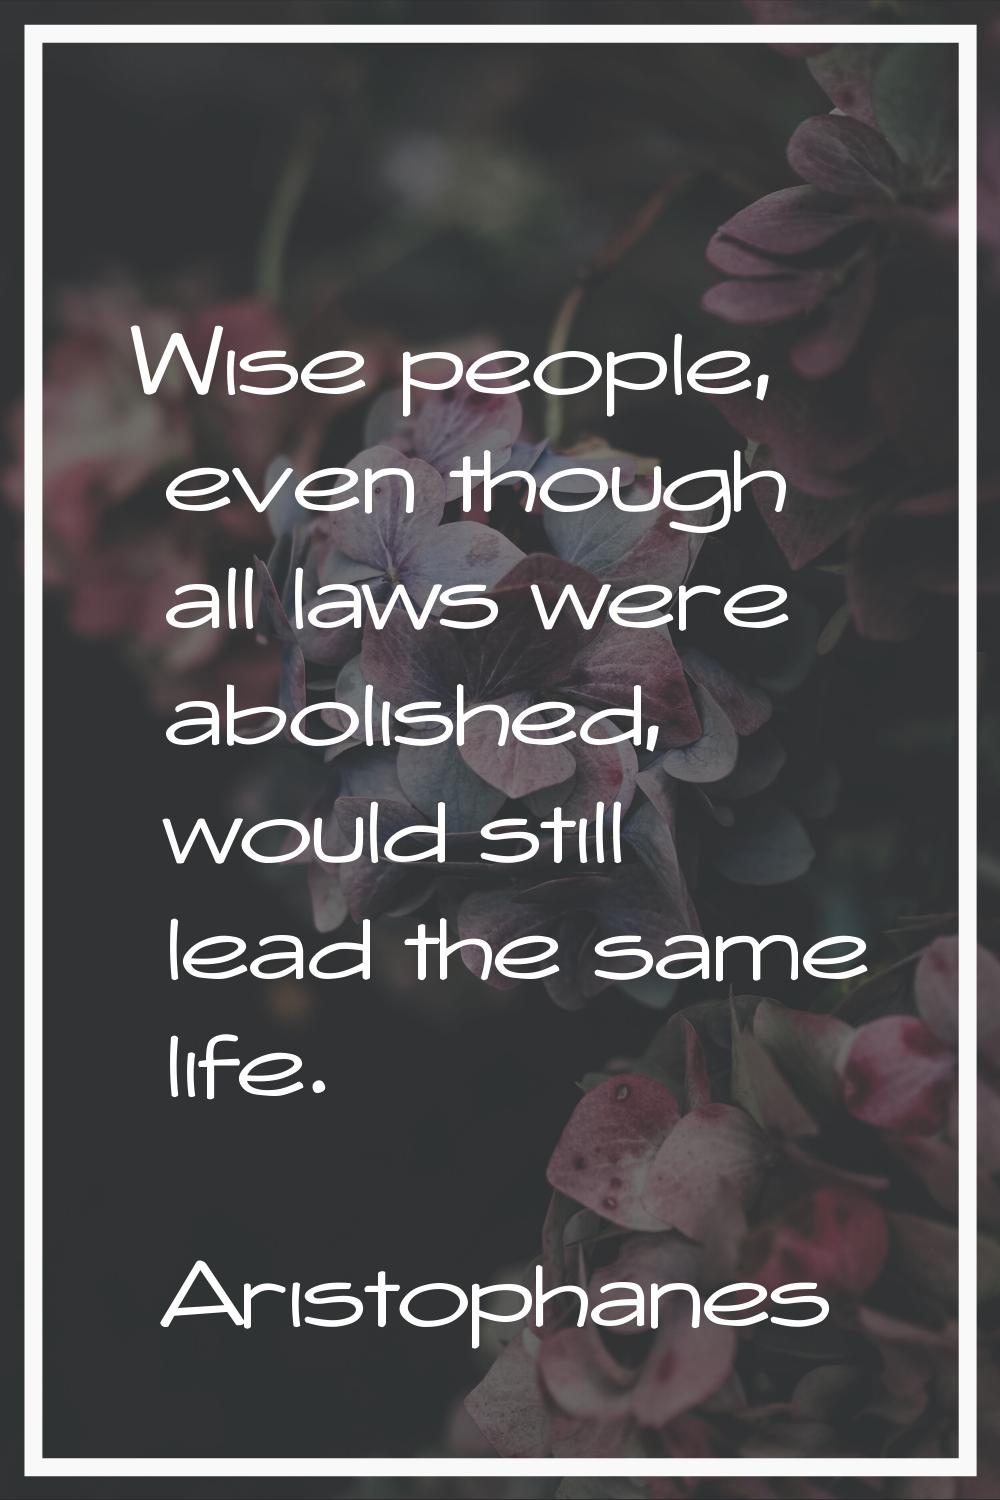 Wise people, even though all laws were abolished, would still lead the same life.